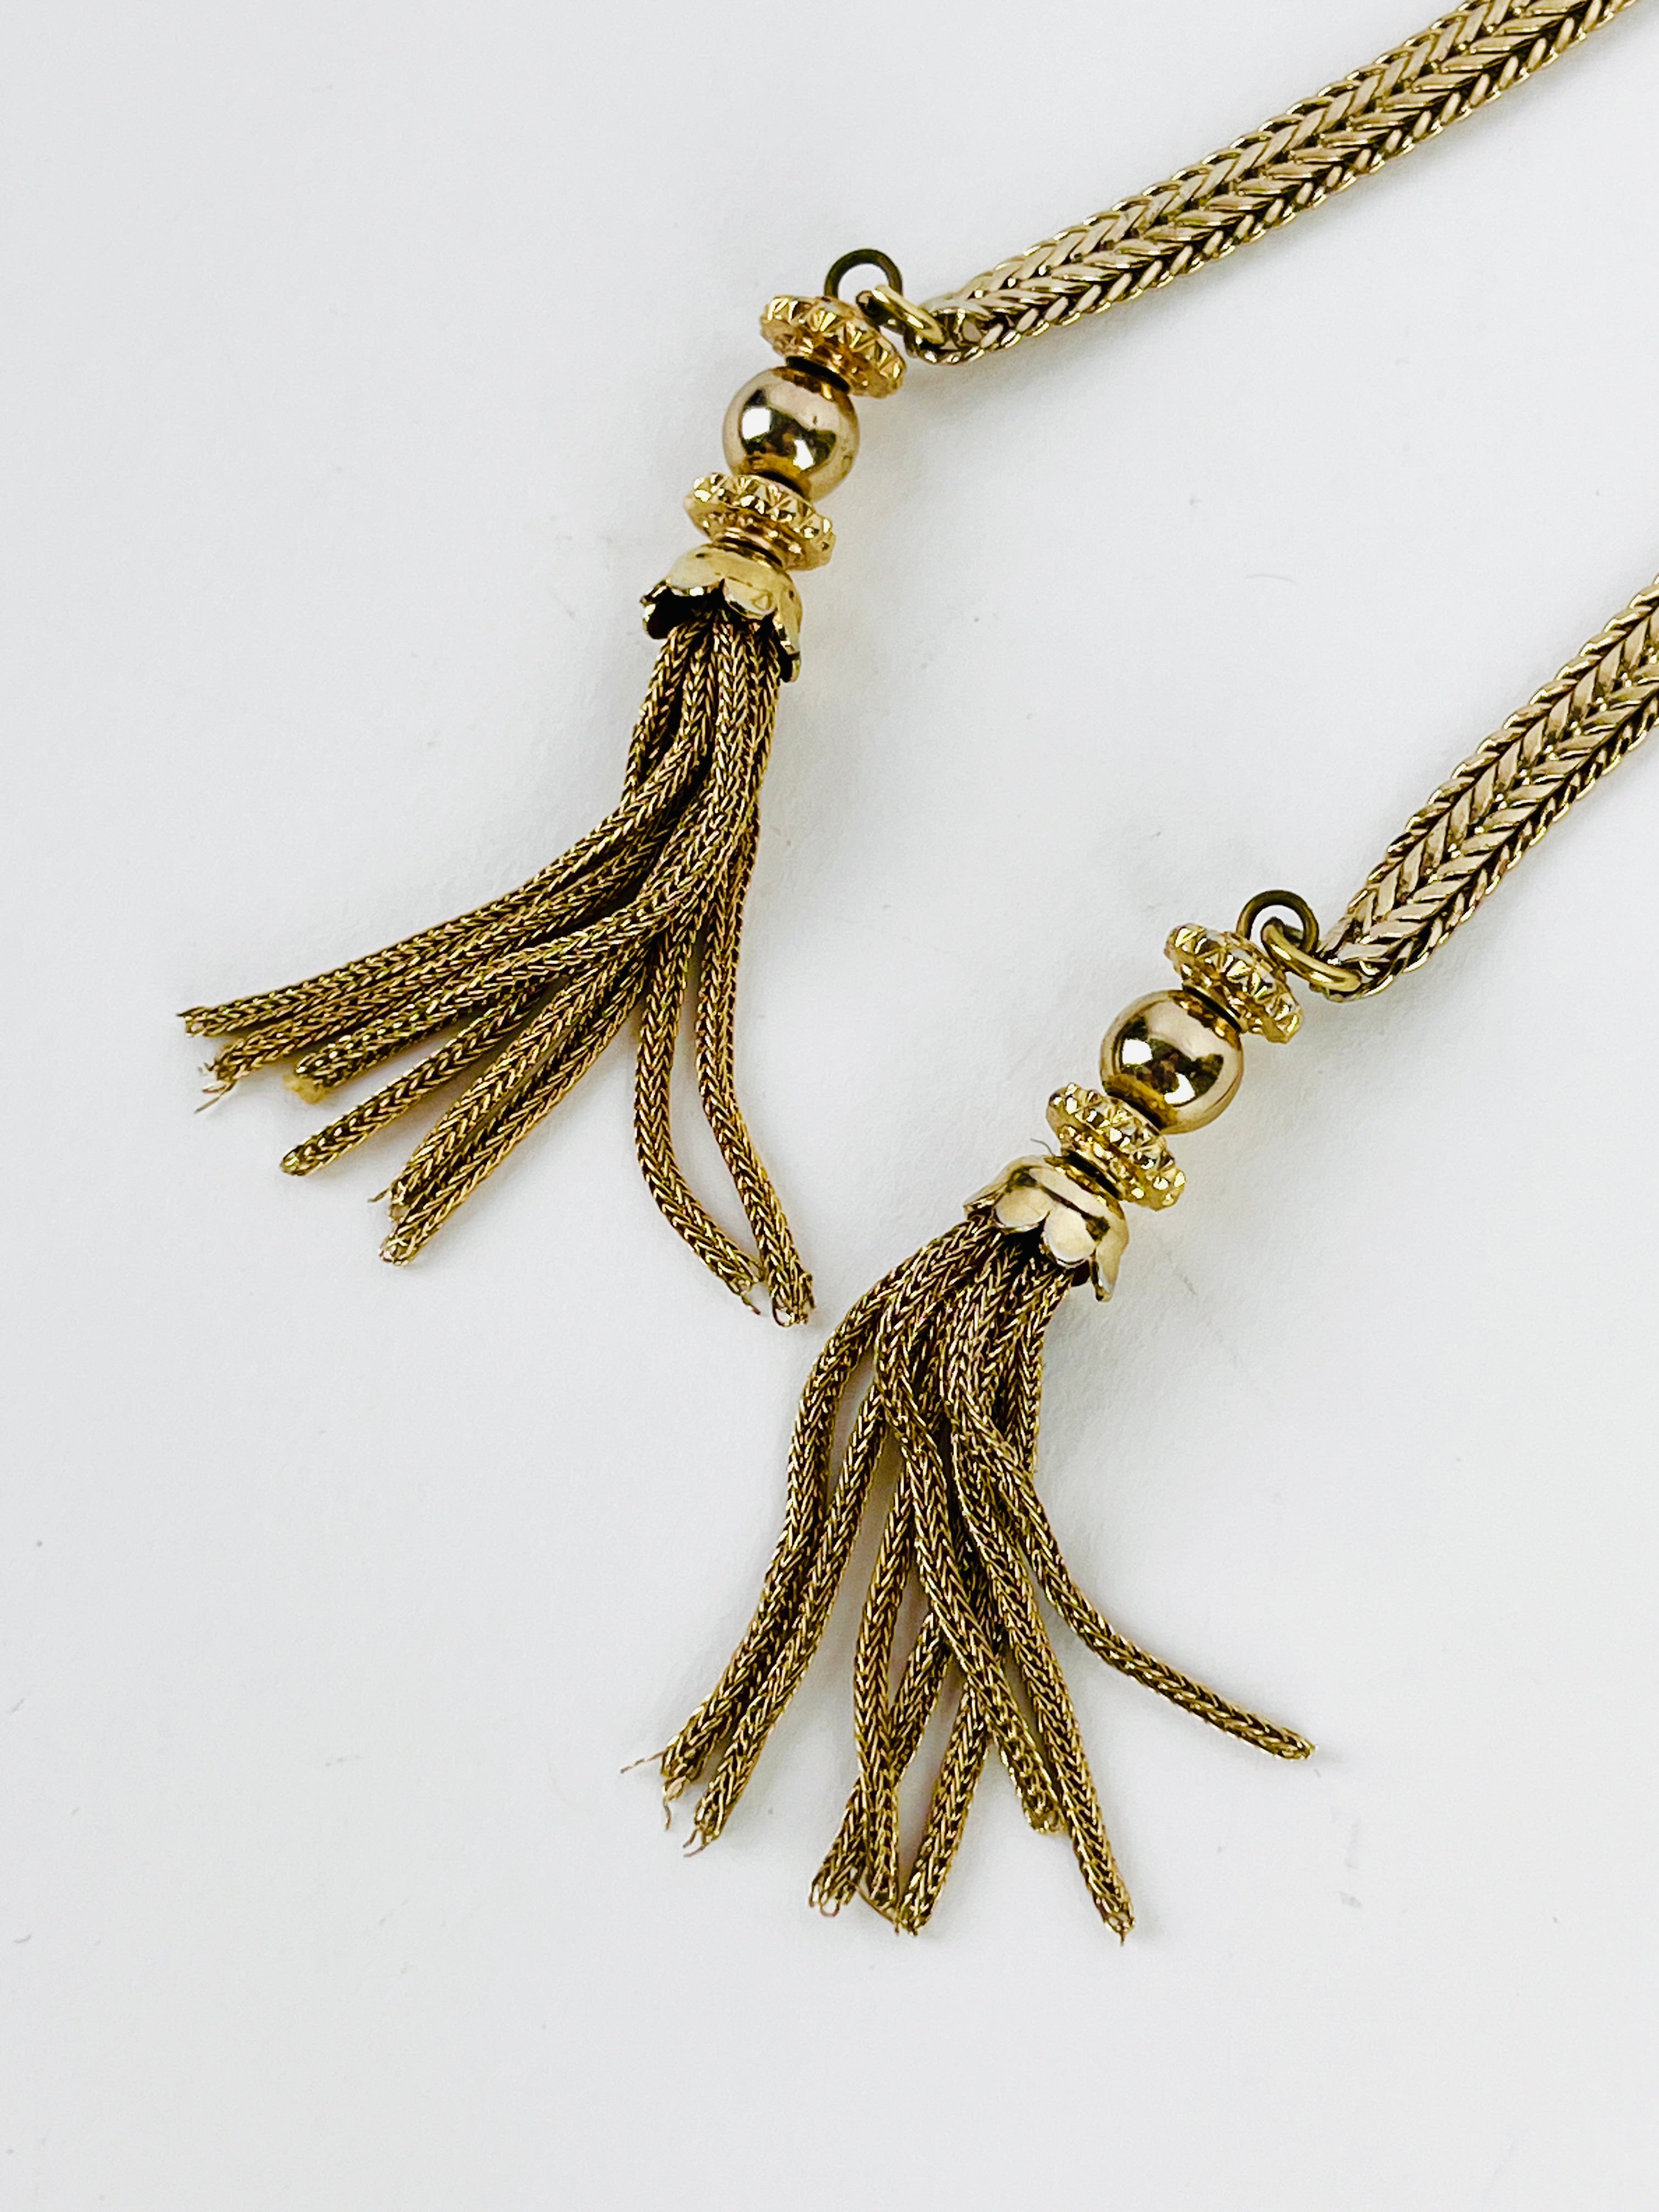 Buy 70s Sparkling Gold Plated Monet Tassel Necklace Modernist Teardrop  Pendant Cable Chain VFG Online in India - Etsy